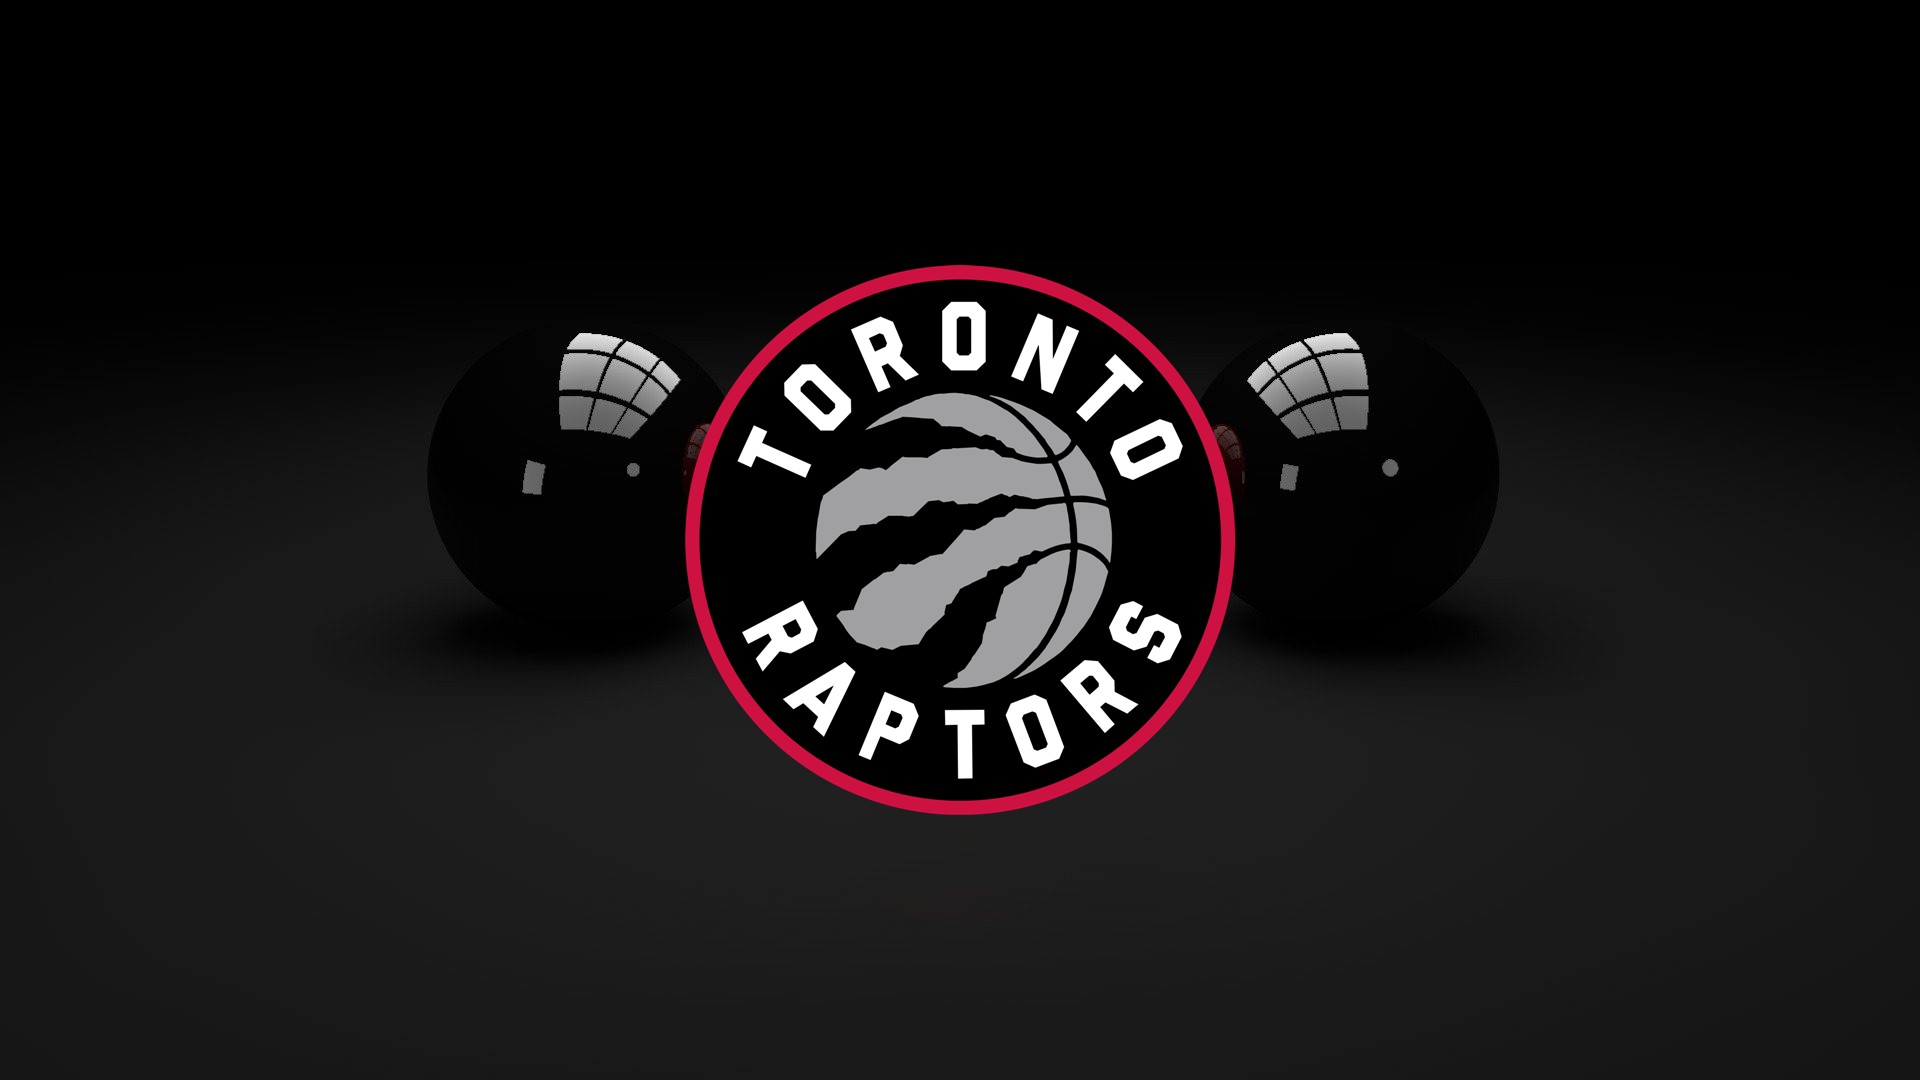 Basketball Toronto For Mac Wallpaper with image dimensions 1920x1080 pixel. You can make this wallpaper for your Desktop Computer Backgrounds, Windows or Mac Screensavers, iPhone Lock screen, Tablet or Android and another Mobile Phone device